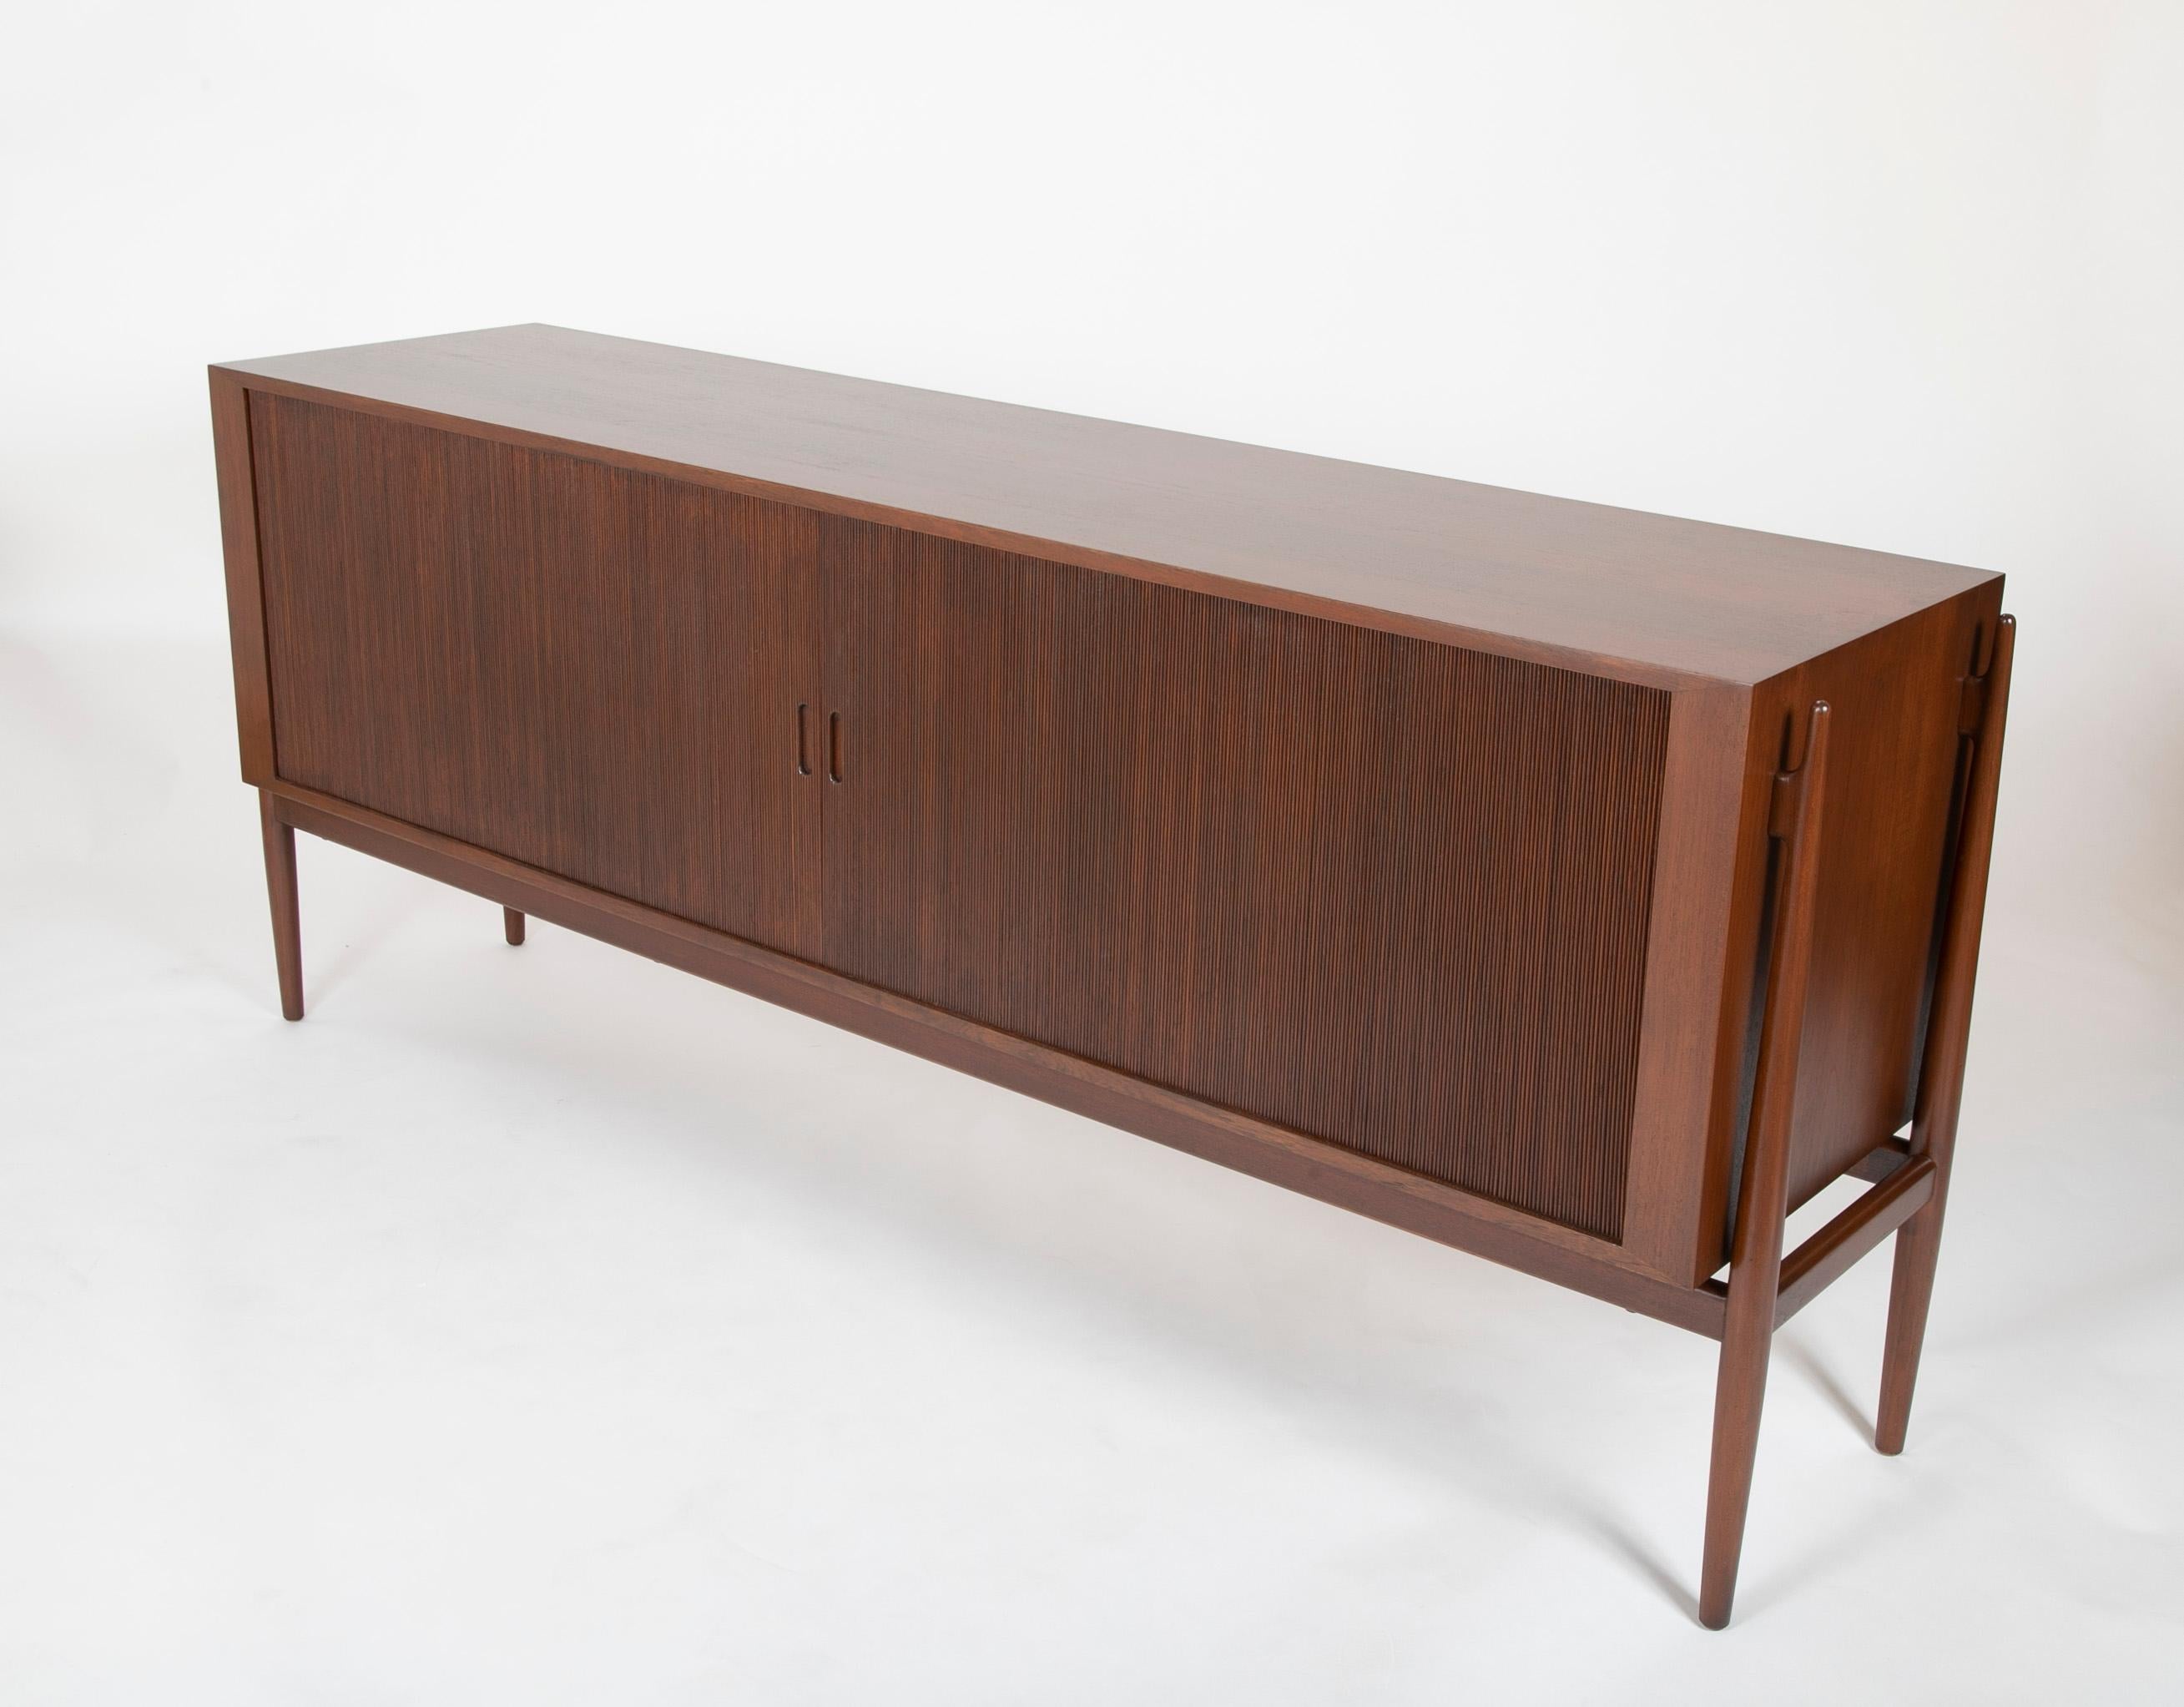 A model NV54 sideboard designed in 1954 produced by Niels Vodder. Exterior is dark brown teak and the interior cabinet is Maple. Having 8 interior drawers and a single shelf.